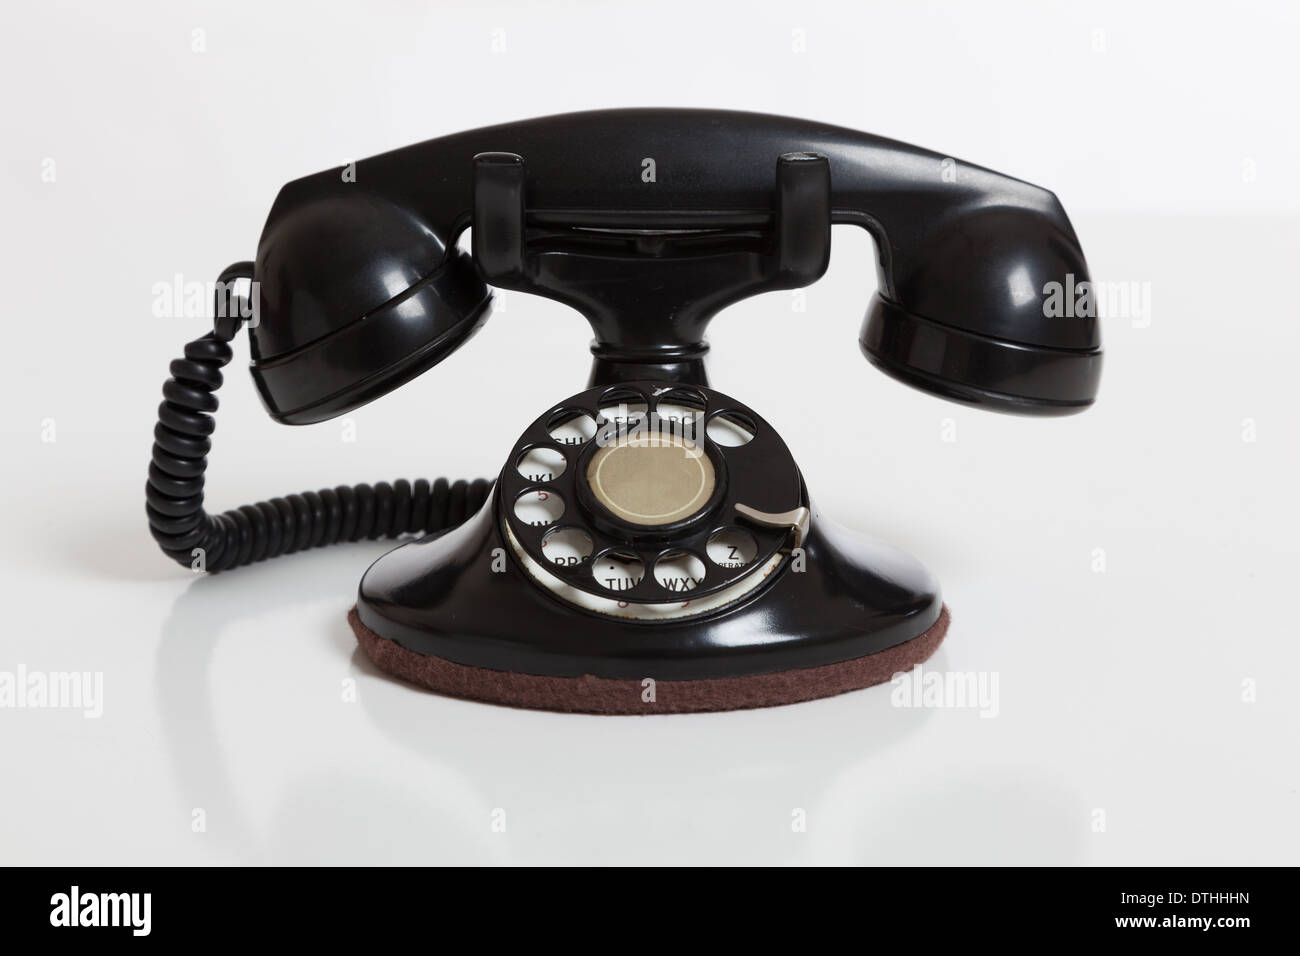 A black, vintage rotary phone on a white background Stock Photo